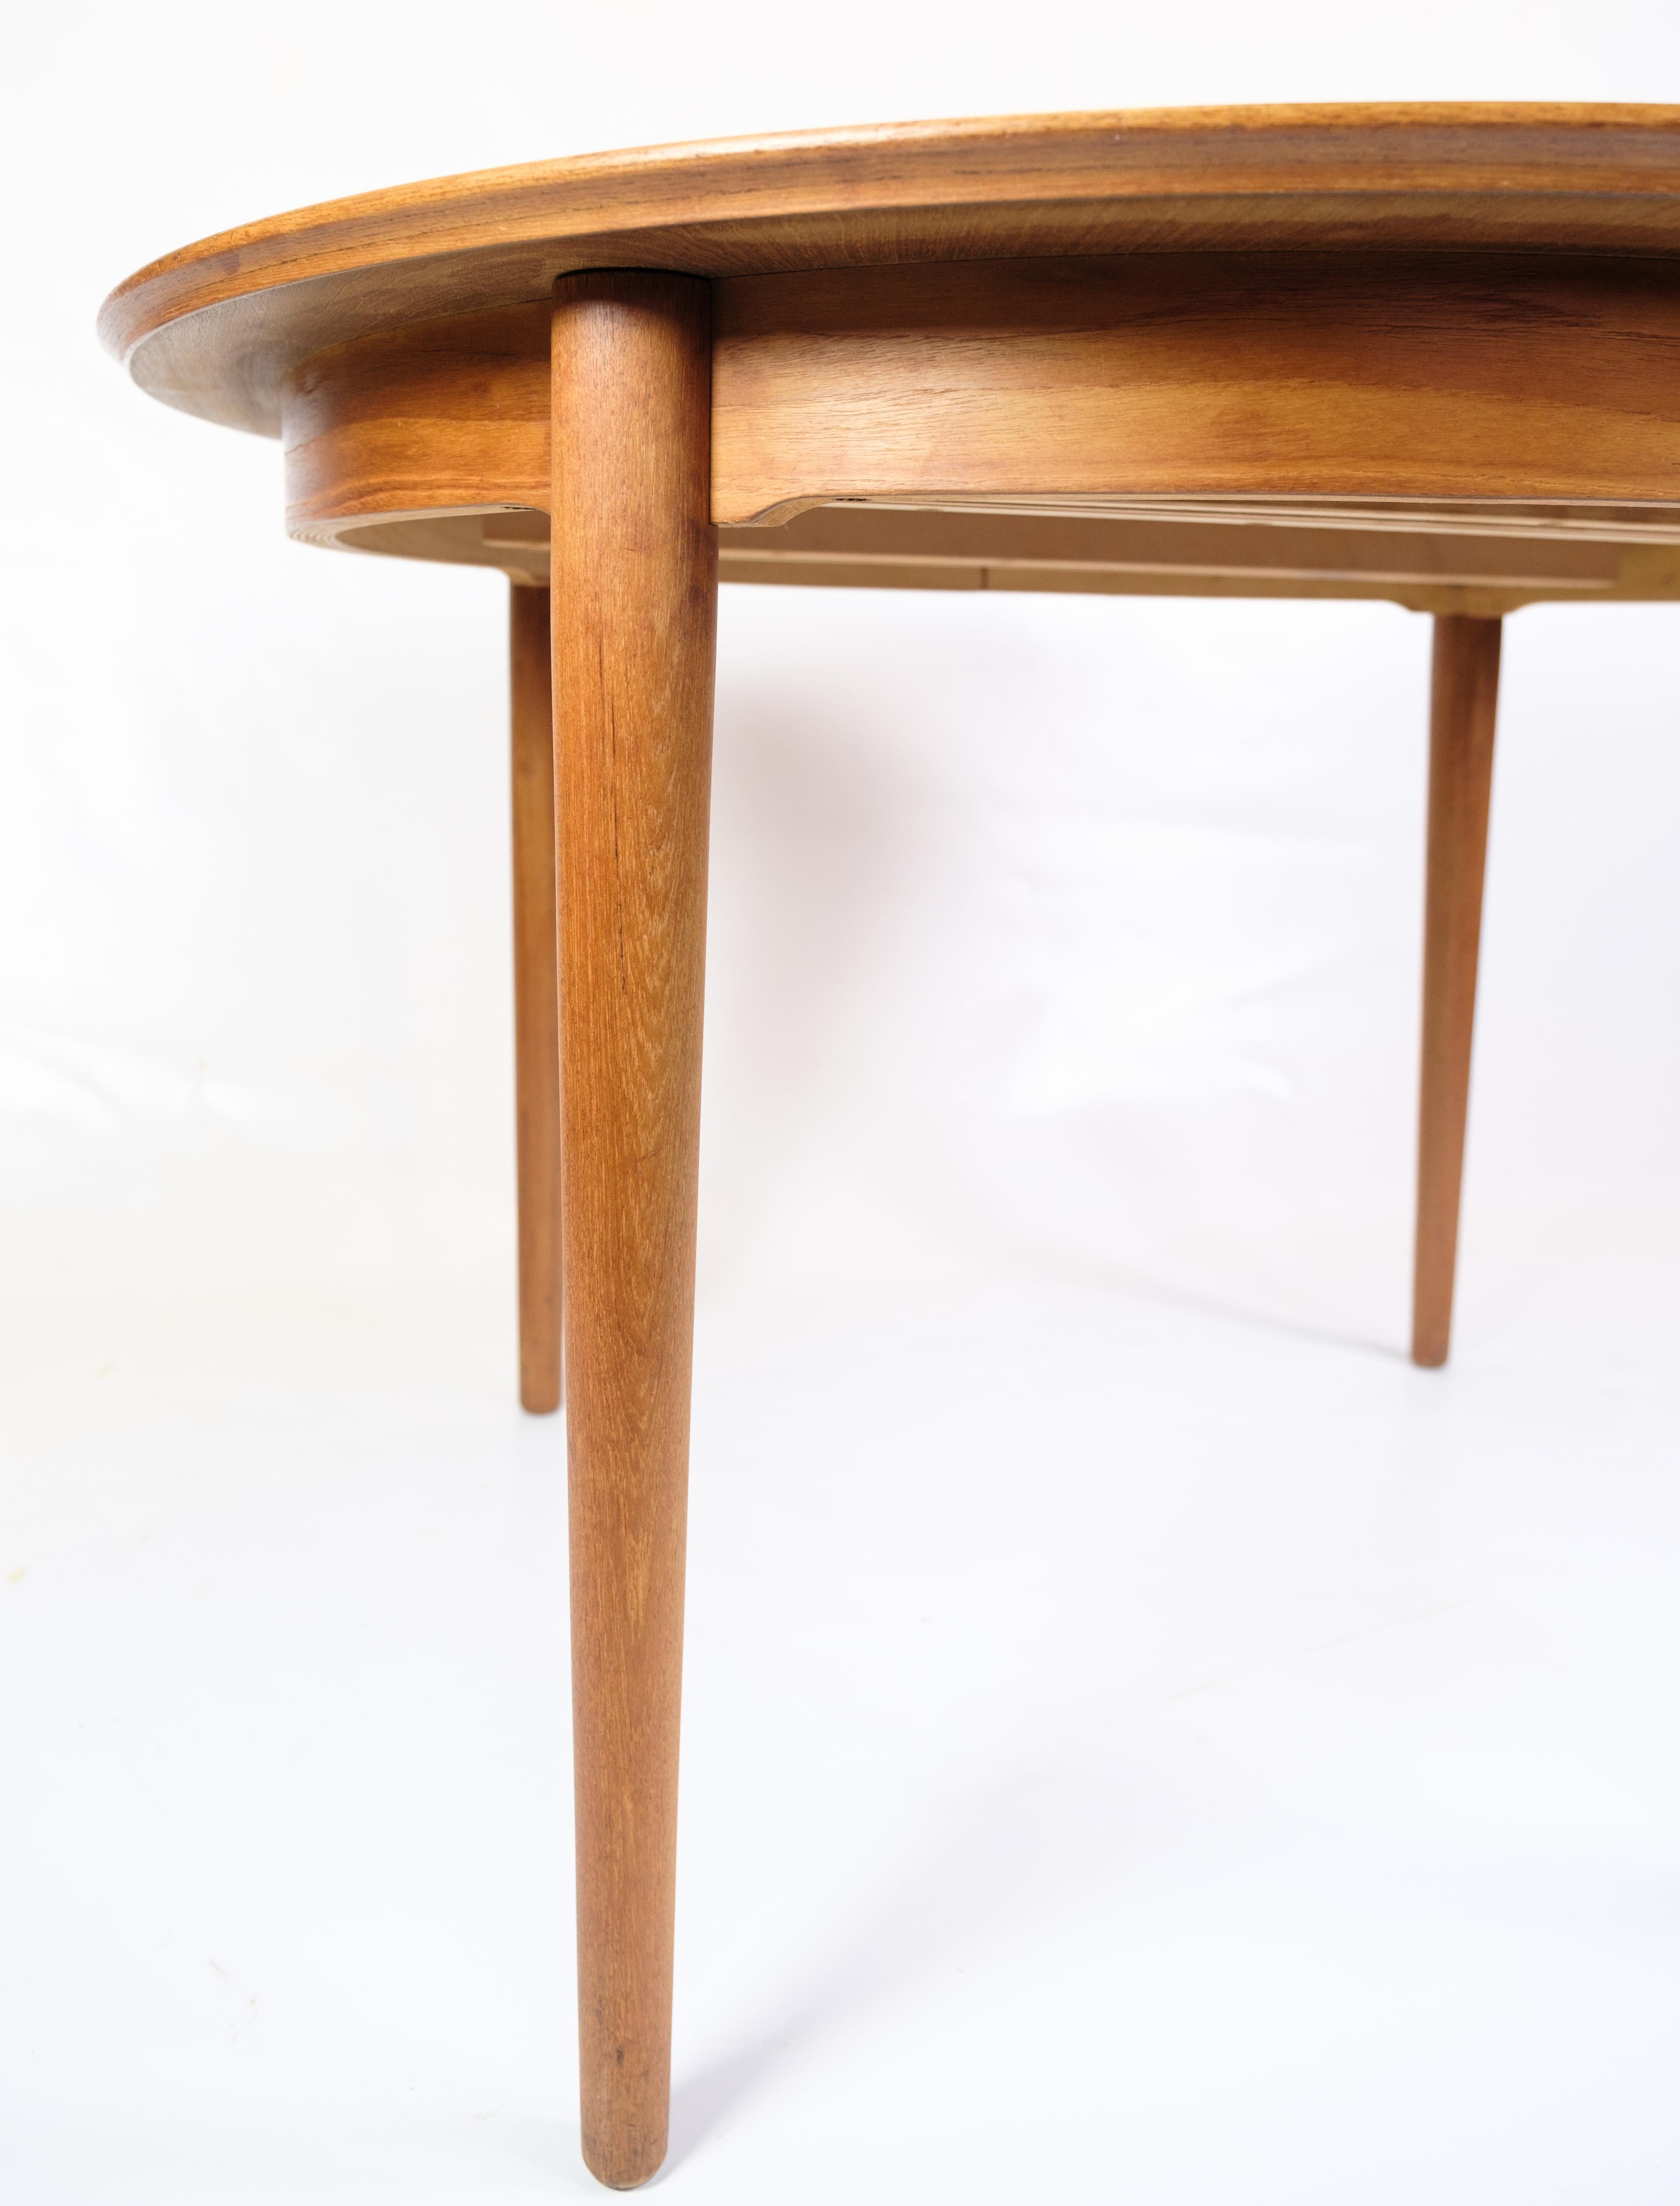 Danish Dining Room Table Made In Teak With Extensions By Arne Vodder From 1960s For Sale